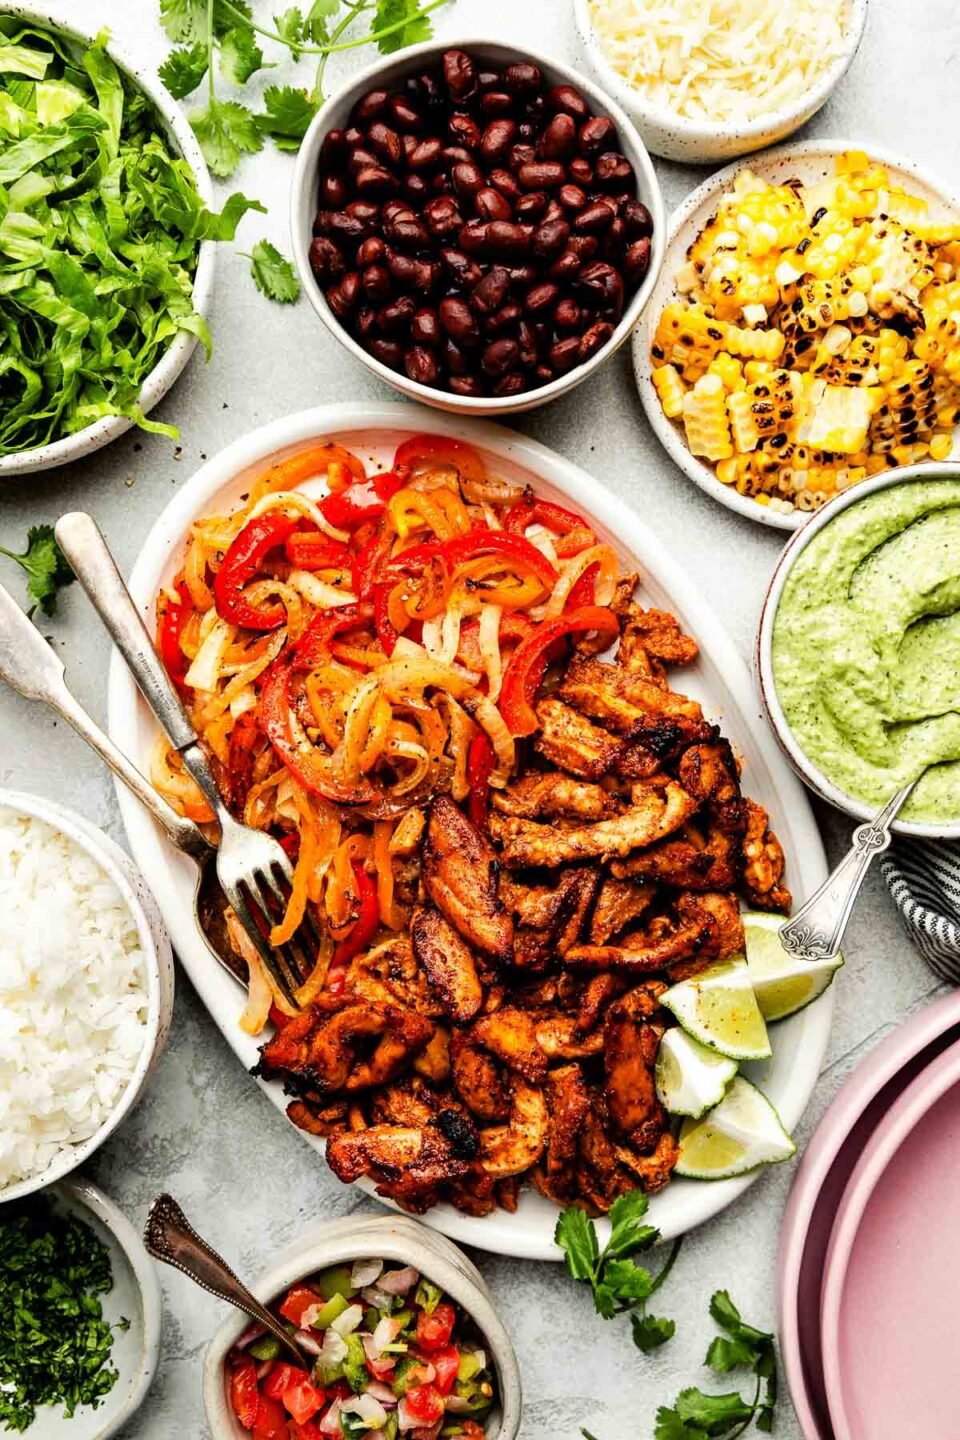 An overhead shot of sheet pan fajita components on a light grey surface: a white oval platter of baked chicken, peppers and onions, a bowl of avocado crema, charred corn, black beans, shredded lettuce, rice, cheese, pico de gallo and cilantro.